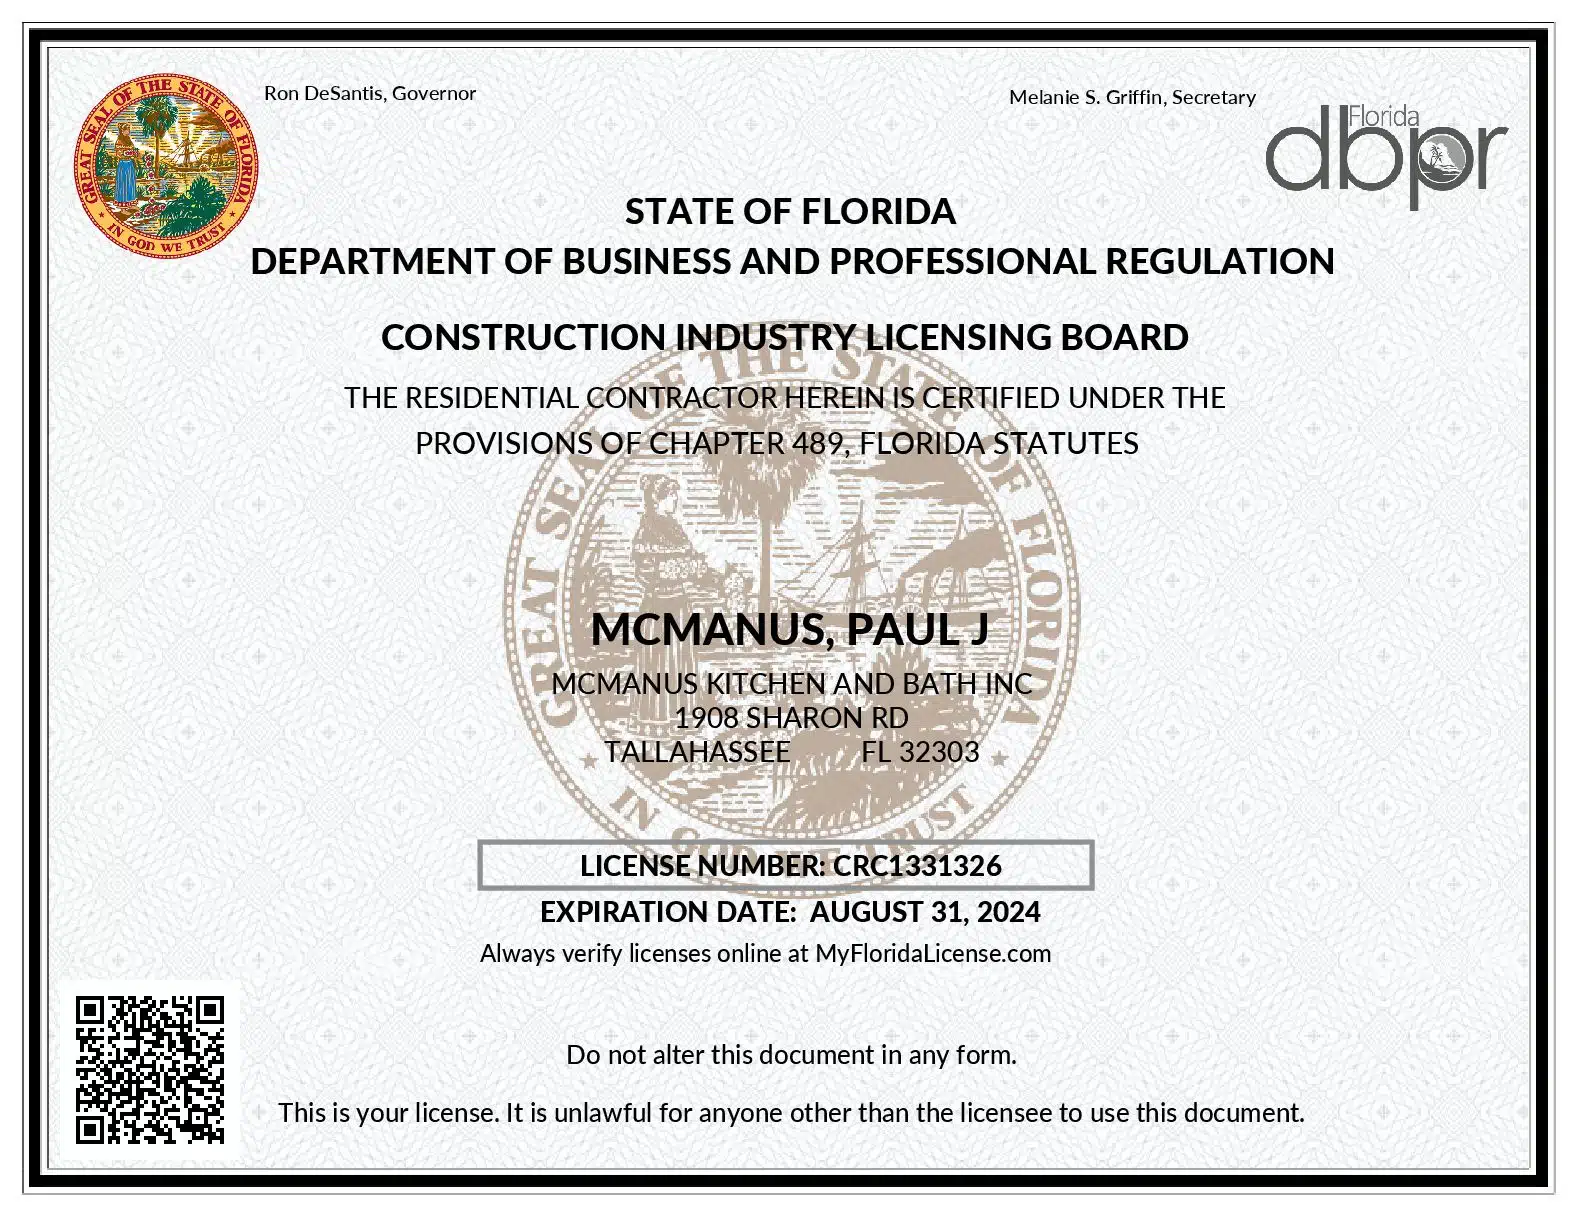 2023/24 Residential Contractors License for McManus Kitchen and Bath 